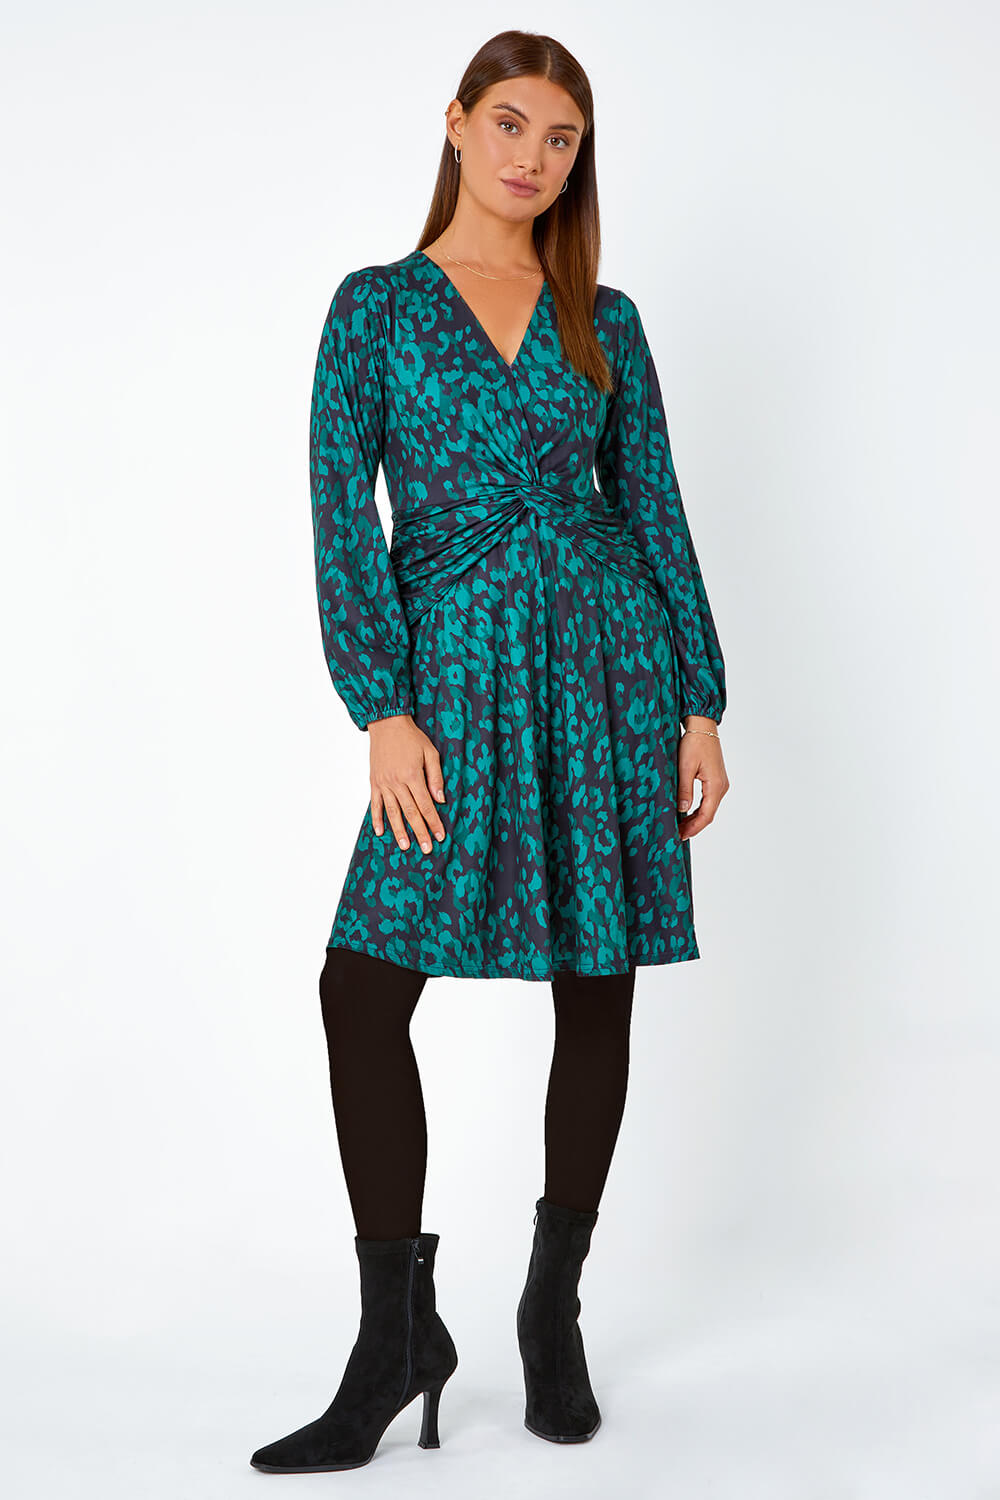 Green Leopard Print Gathered Stretch Dress, Image 3 of 5